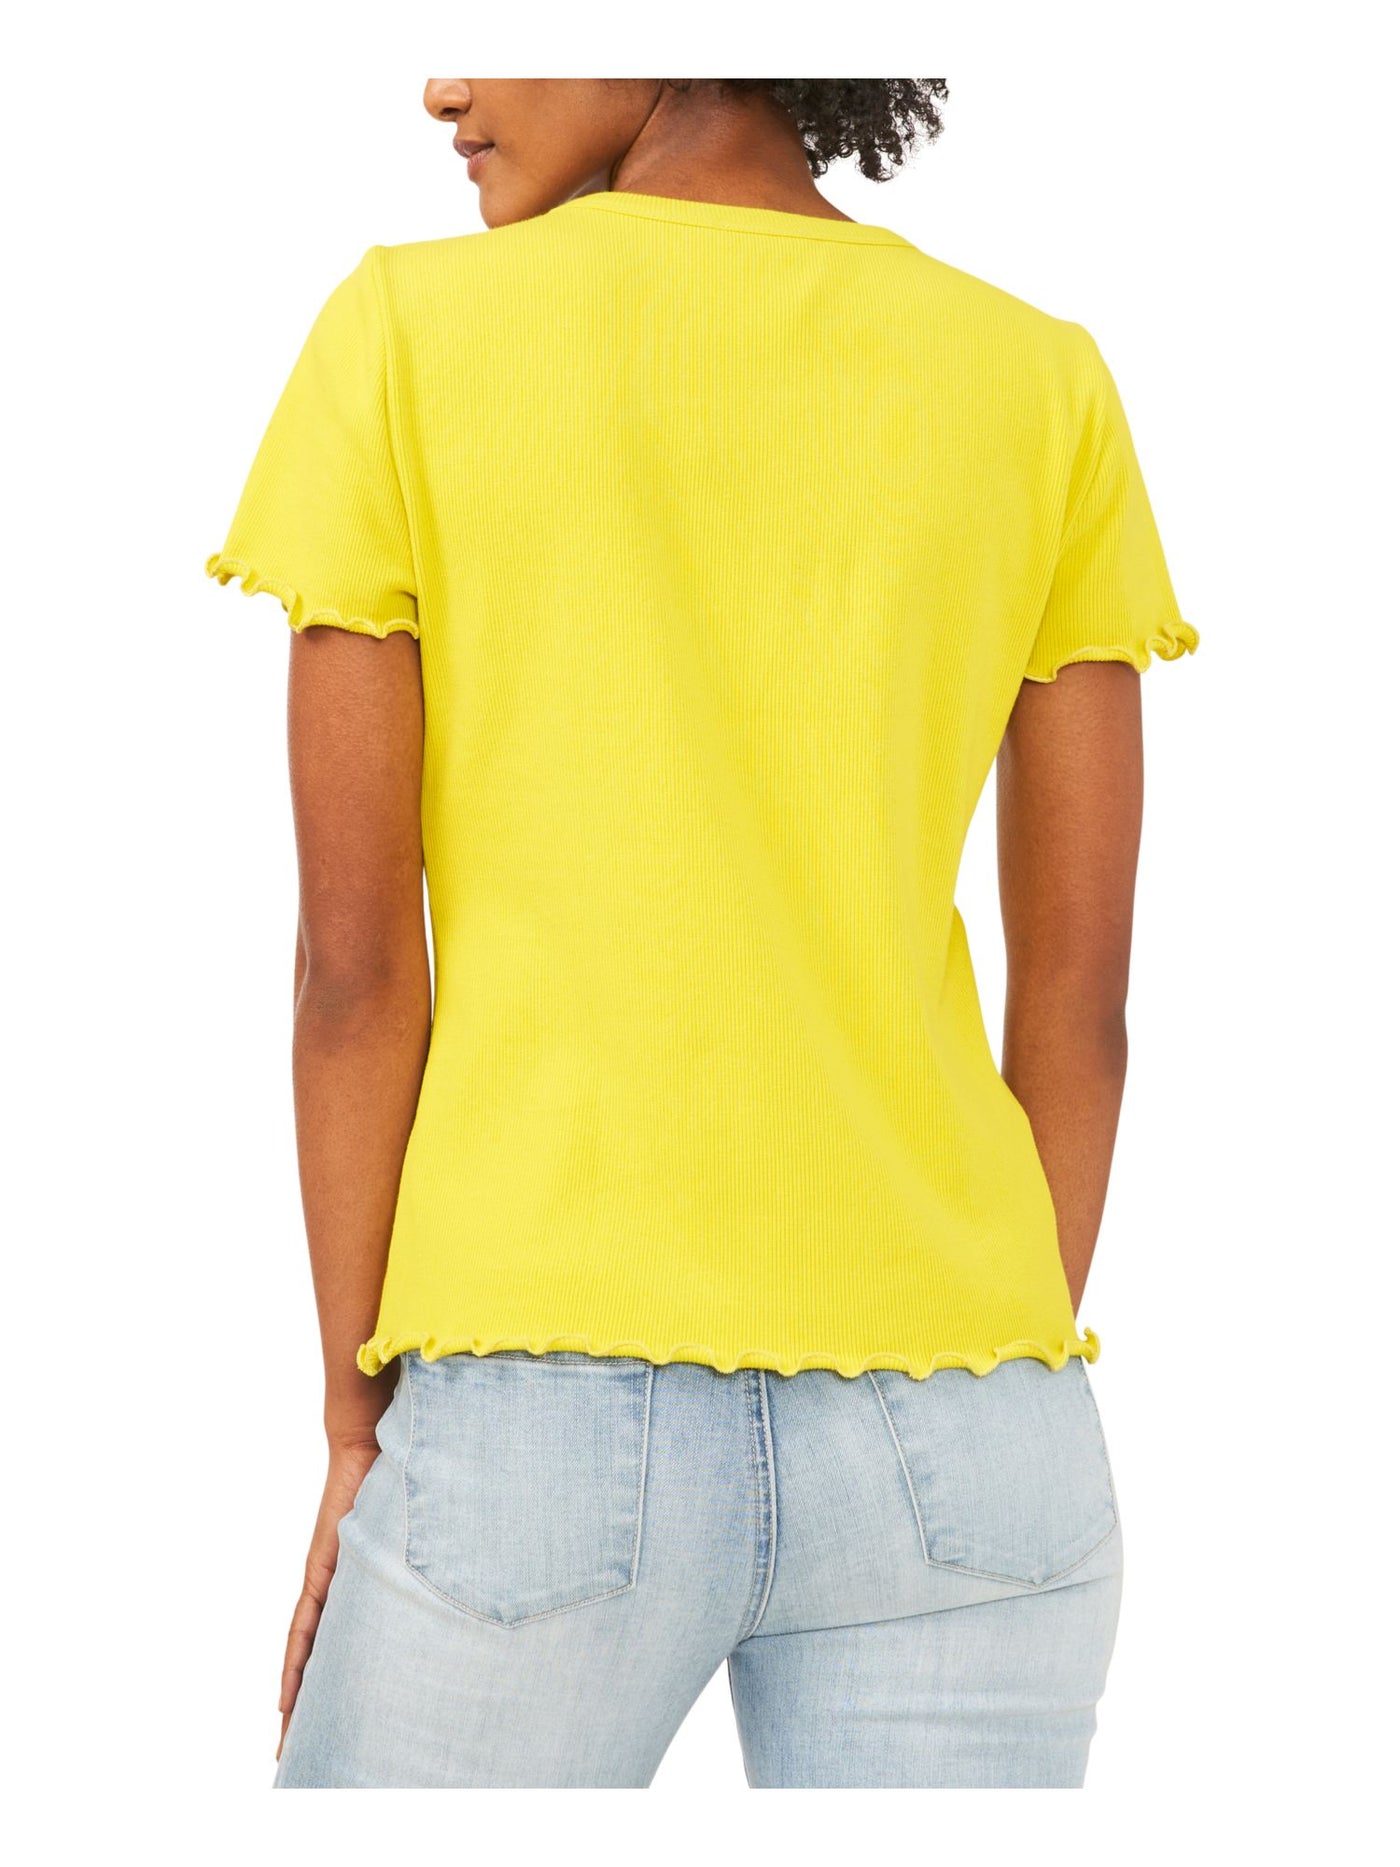 RILEY&RAE Womens Yellow Stretch Ribbed Buttoned Henley Short Sleeve Crew Neck Top XXL